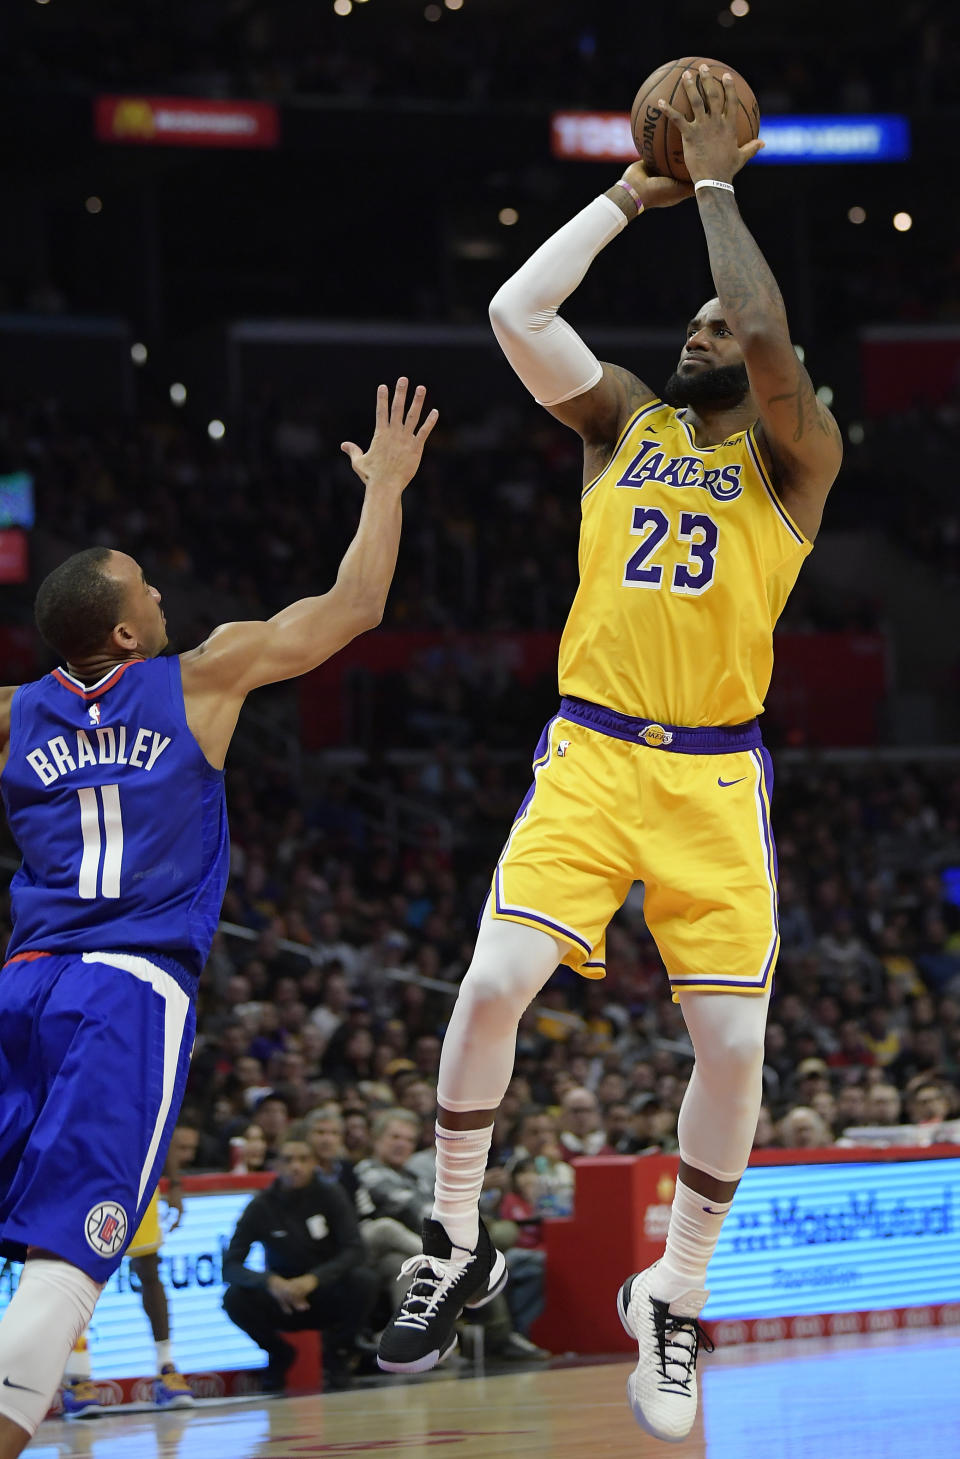 Los Angeles Lakers forward LeBron James, right, shoots as Los Angeles Clippers guard Avery Bradley defends during the second half of an NBA basketball game Thursday, Jan. 31, 2019, in Los Angeles. The Lakers won 123-120. (AP Photo/Mark J. Terrill)